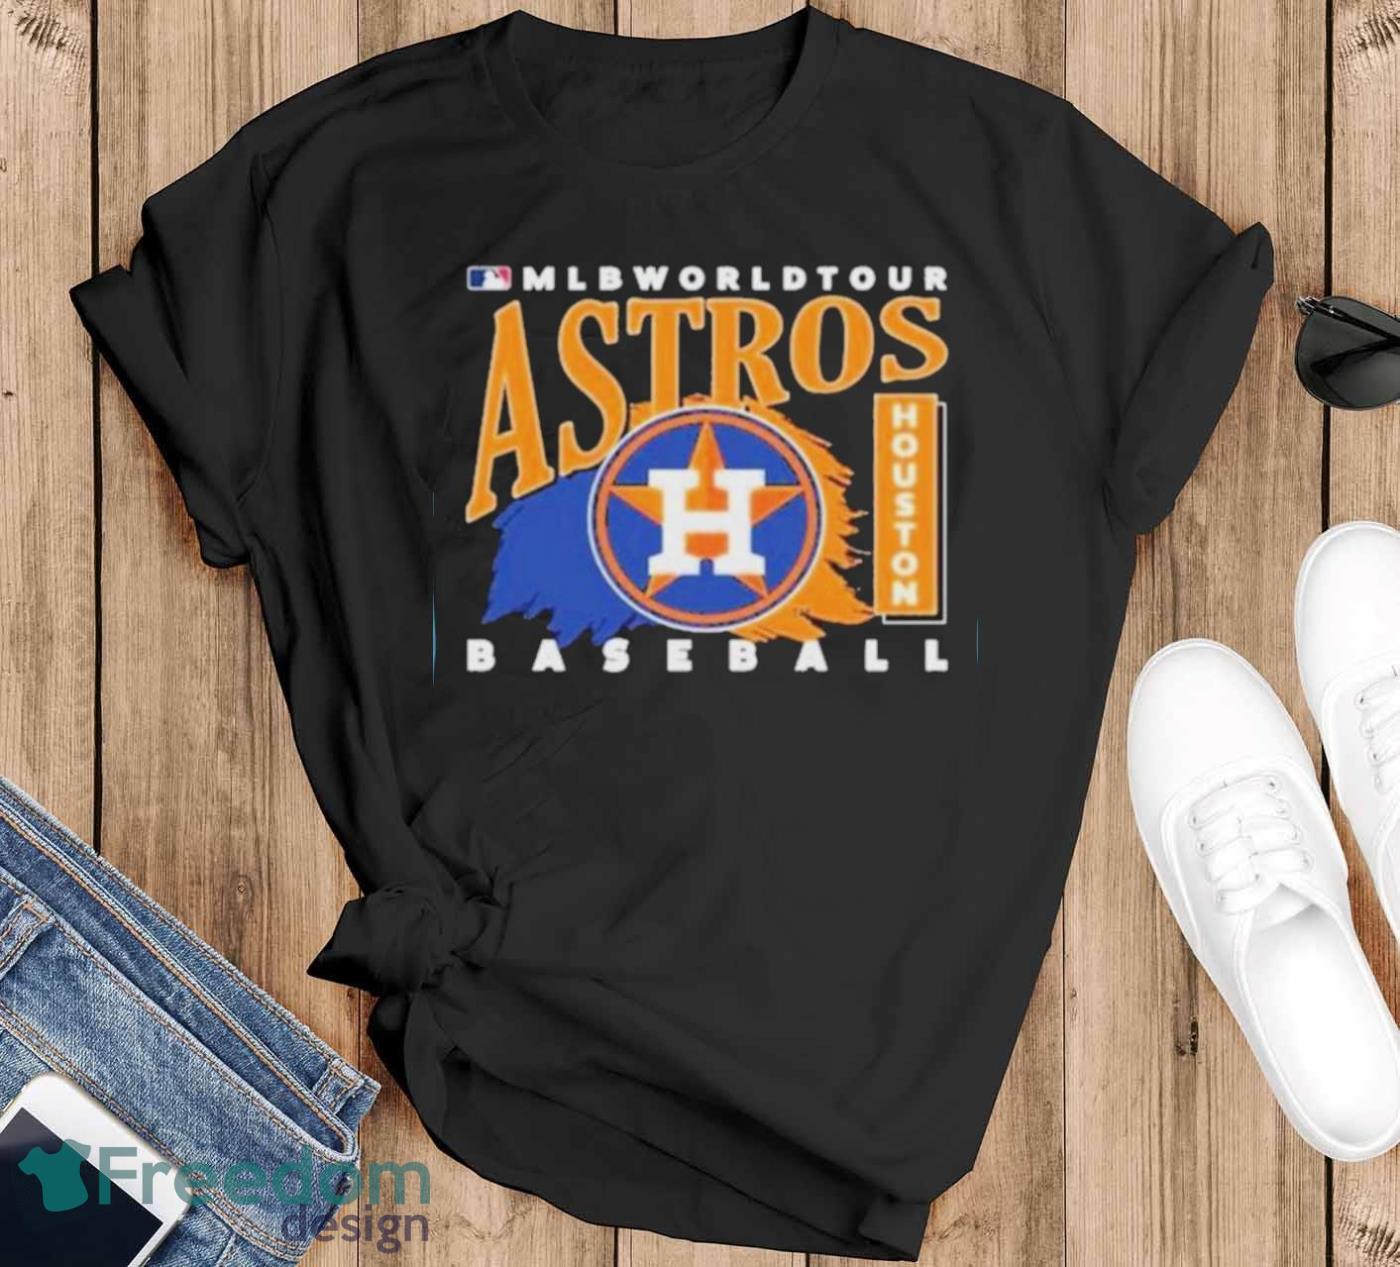 4t astros jersey